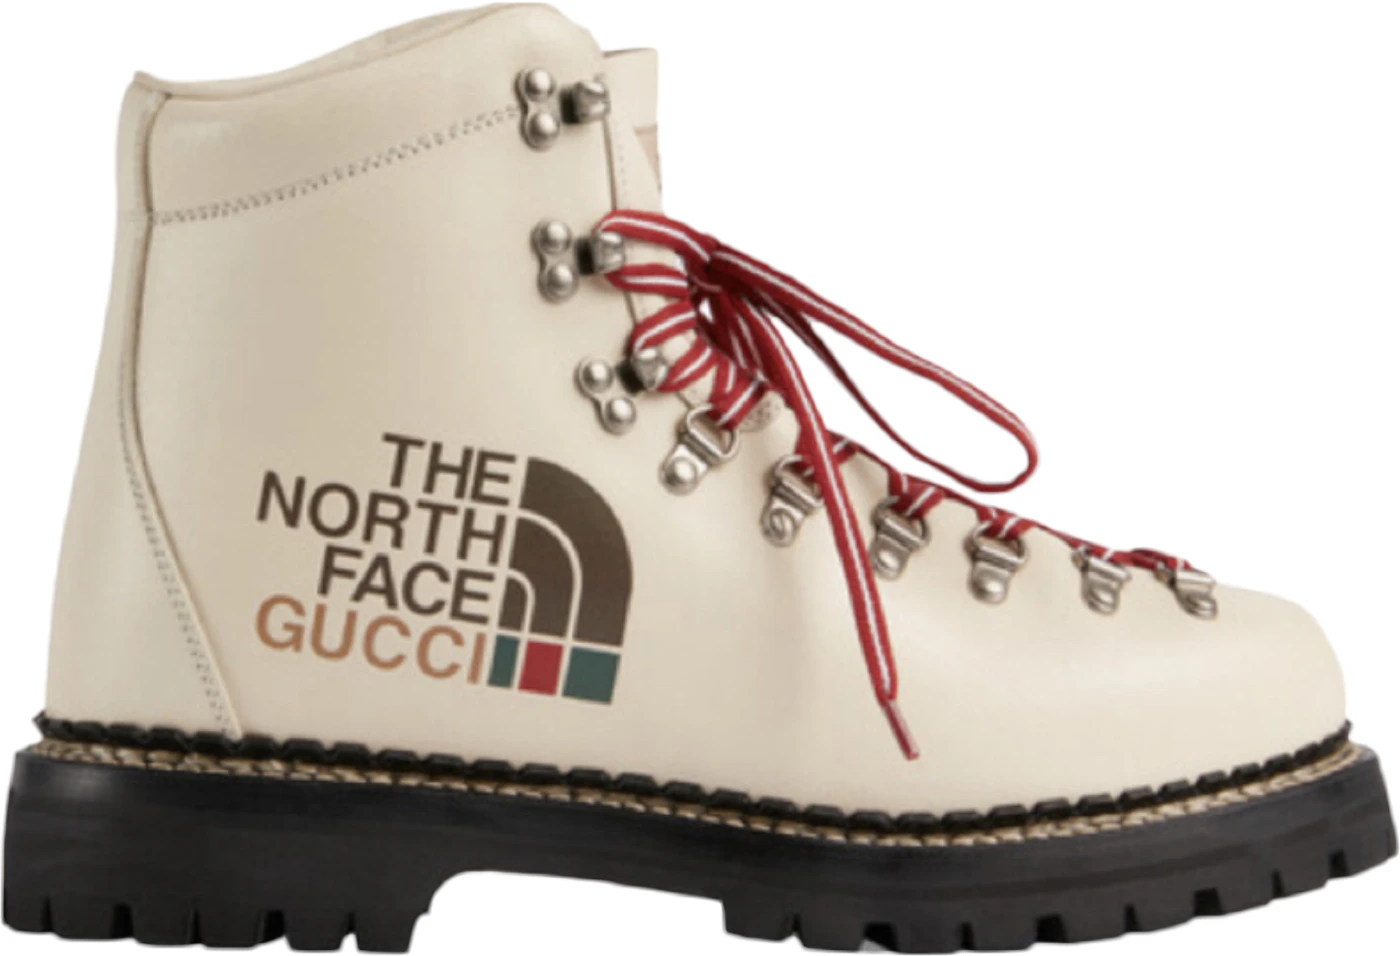 Gucci, Shoes, Gucci North Face Boots